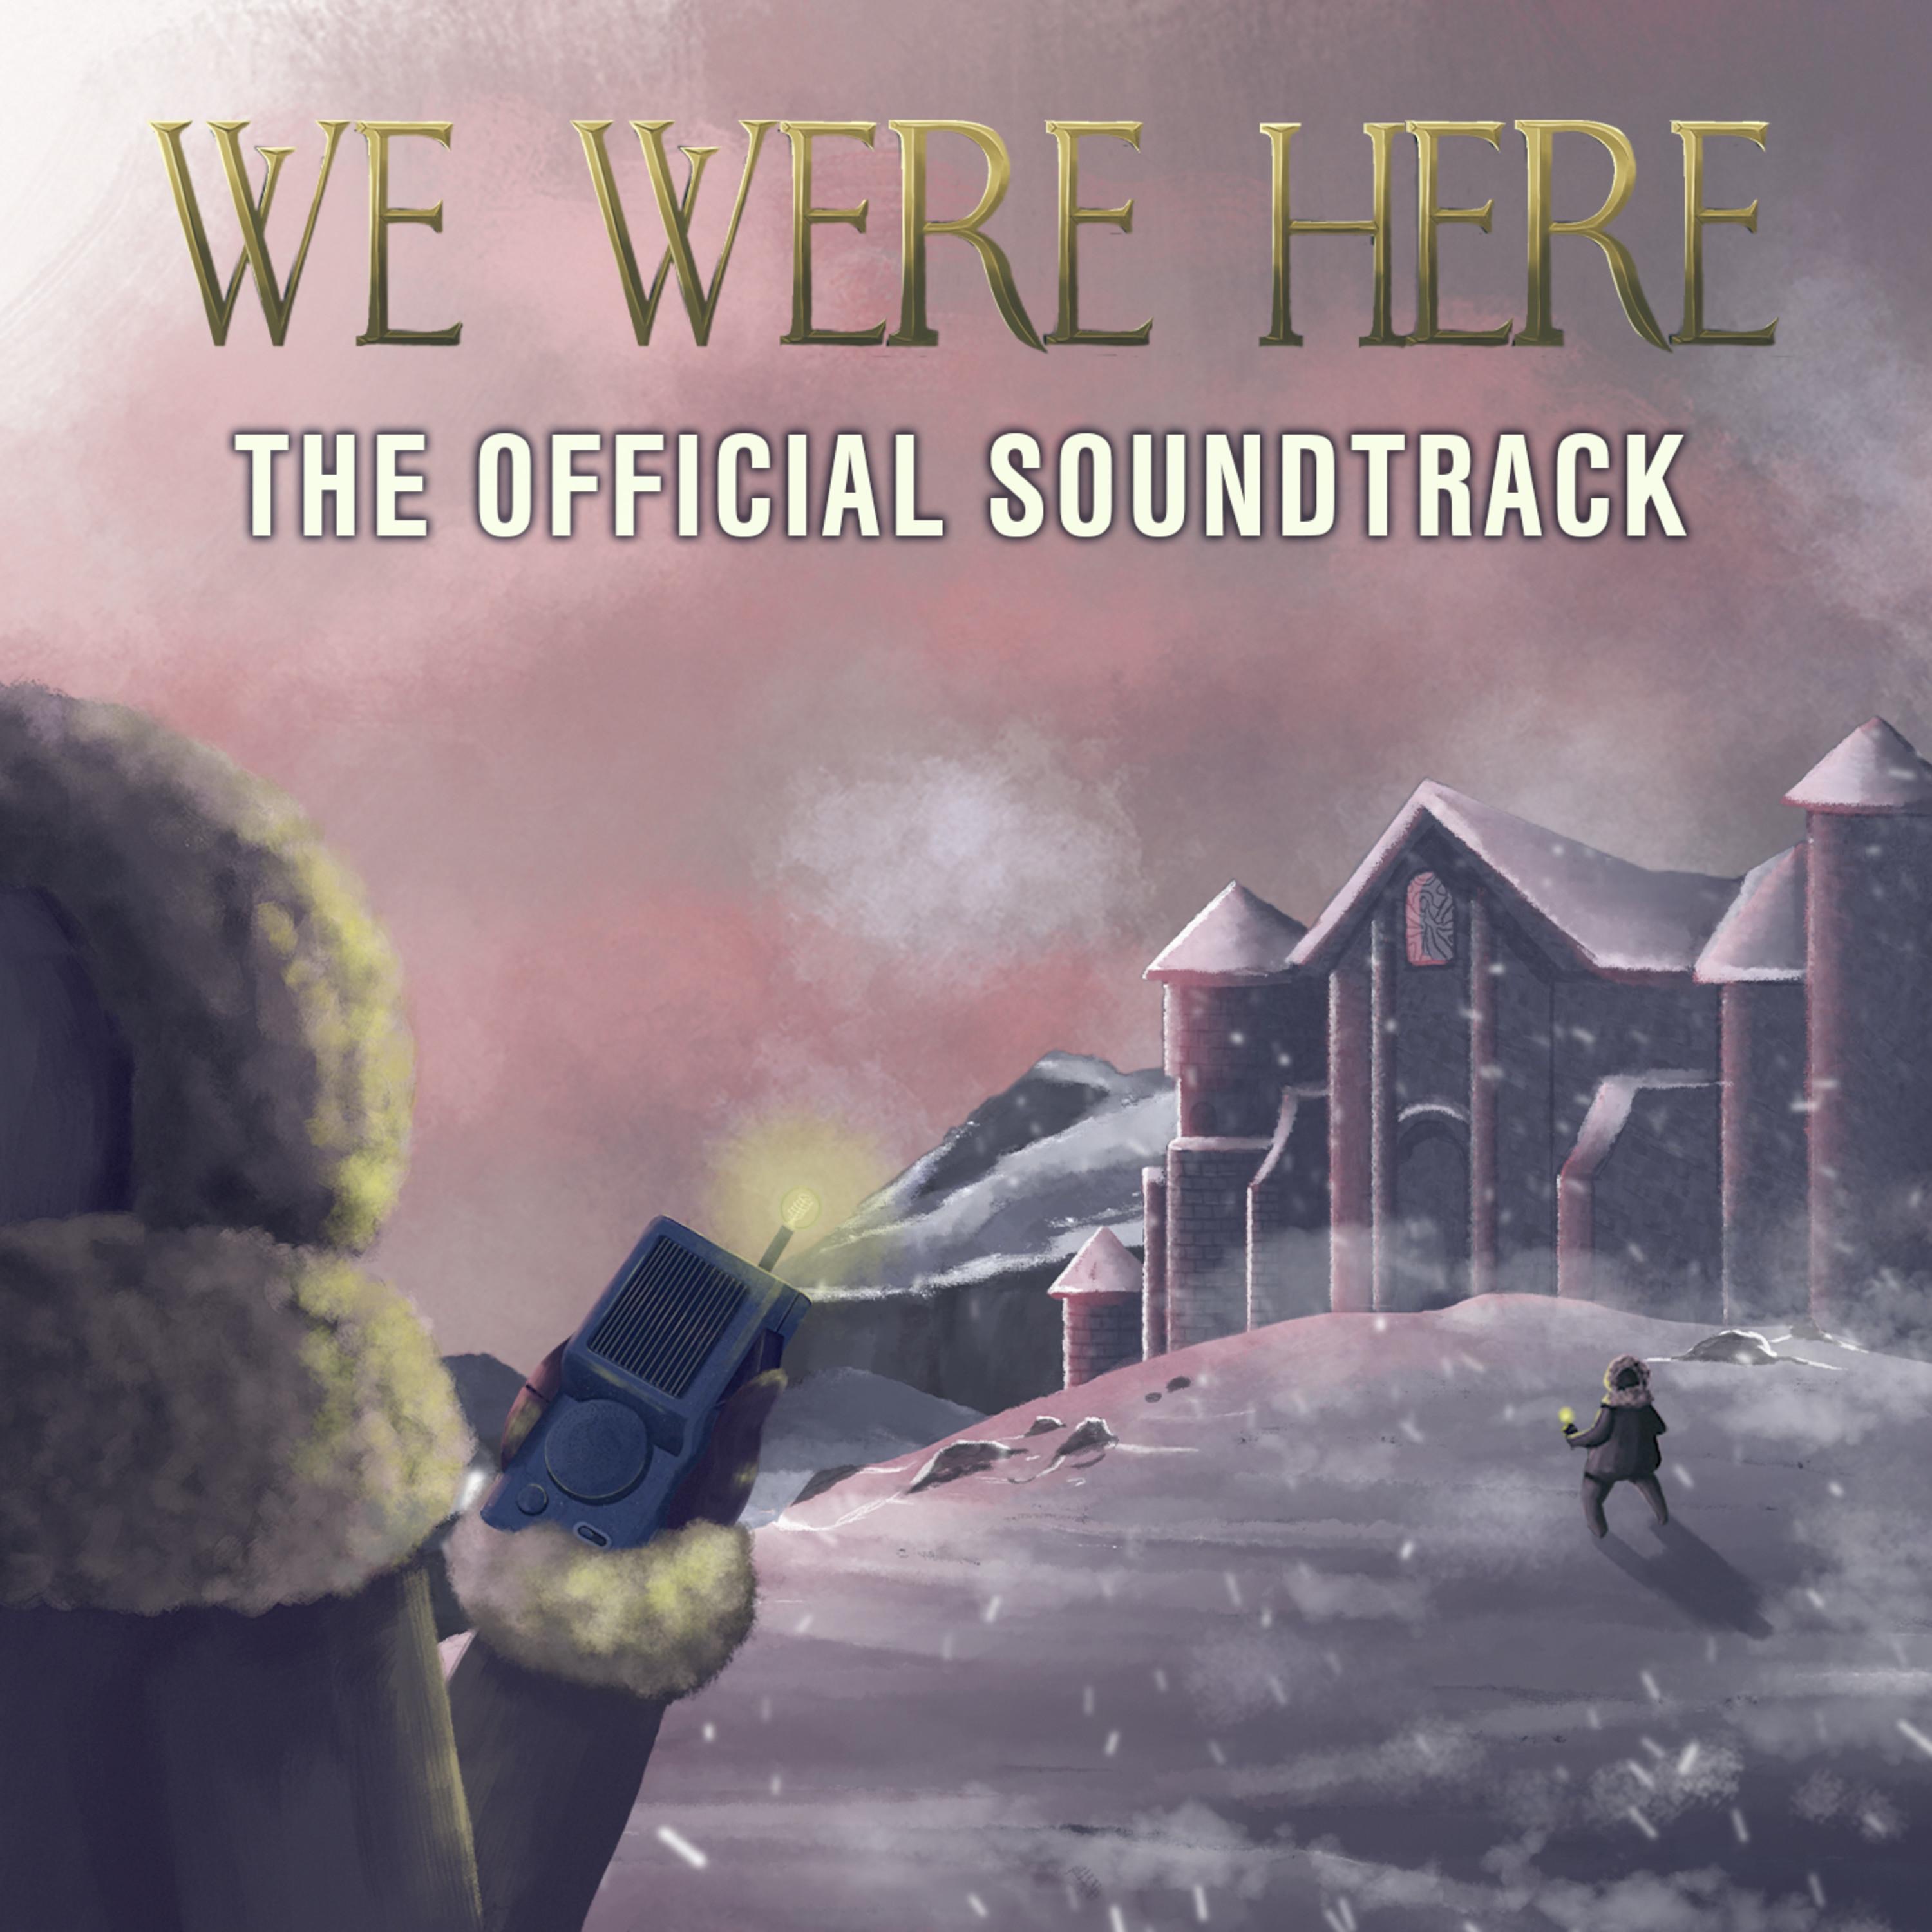 We were here игра. We were here OST. We were here together снег. Игра we were here together. Here отзывы